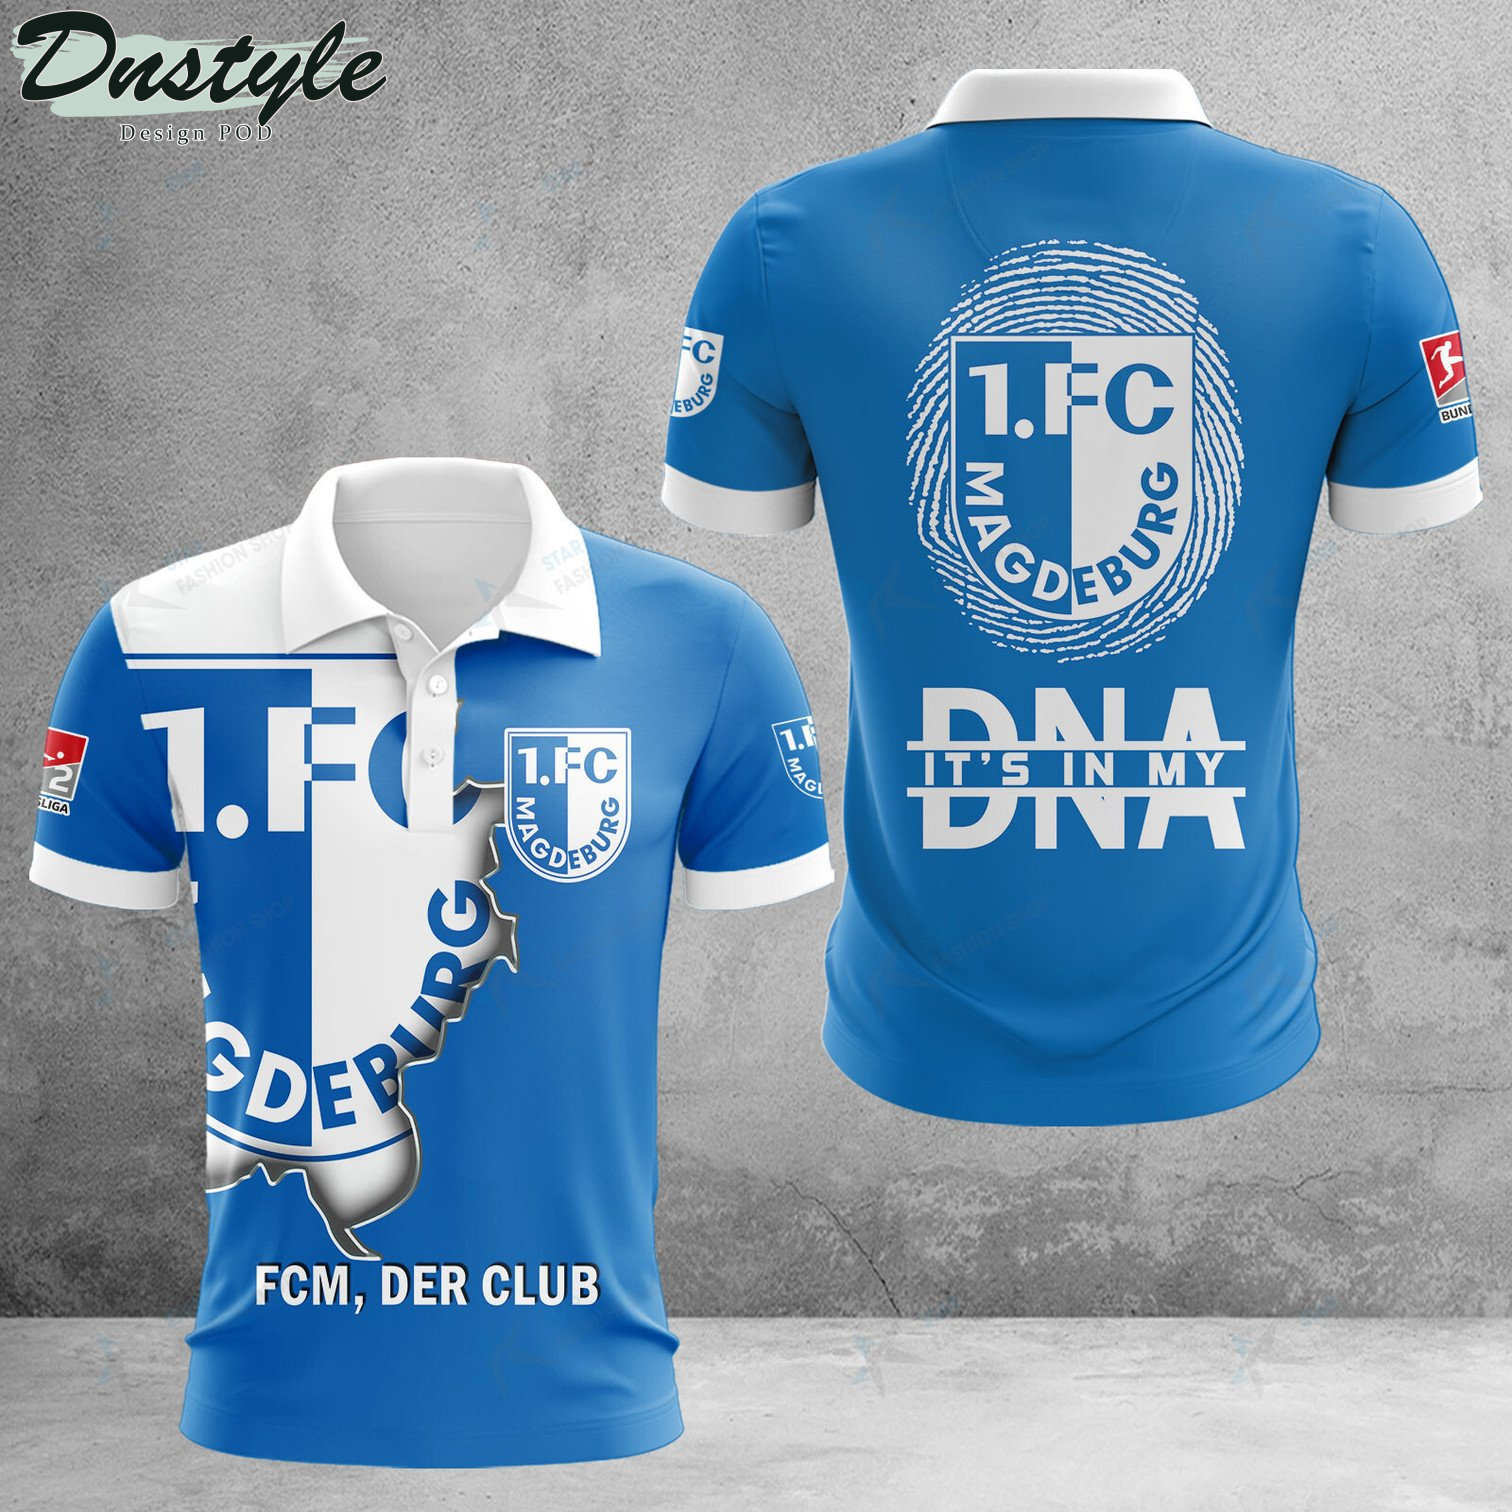 1. FC Magdeburg it’s in my DNA polo shirt